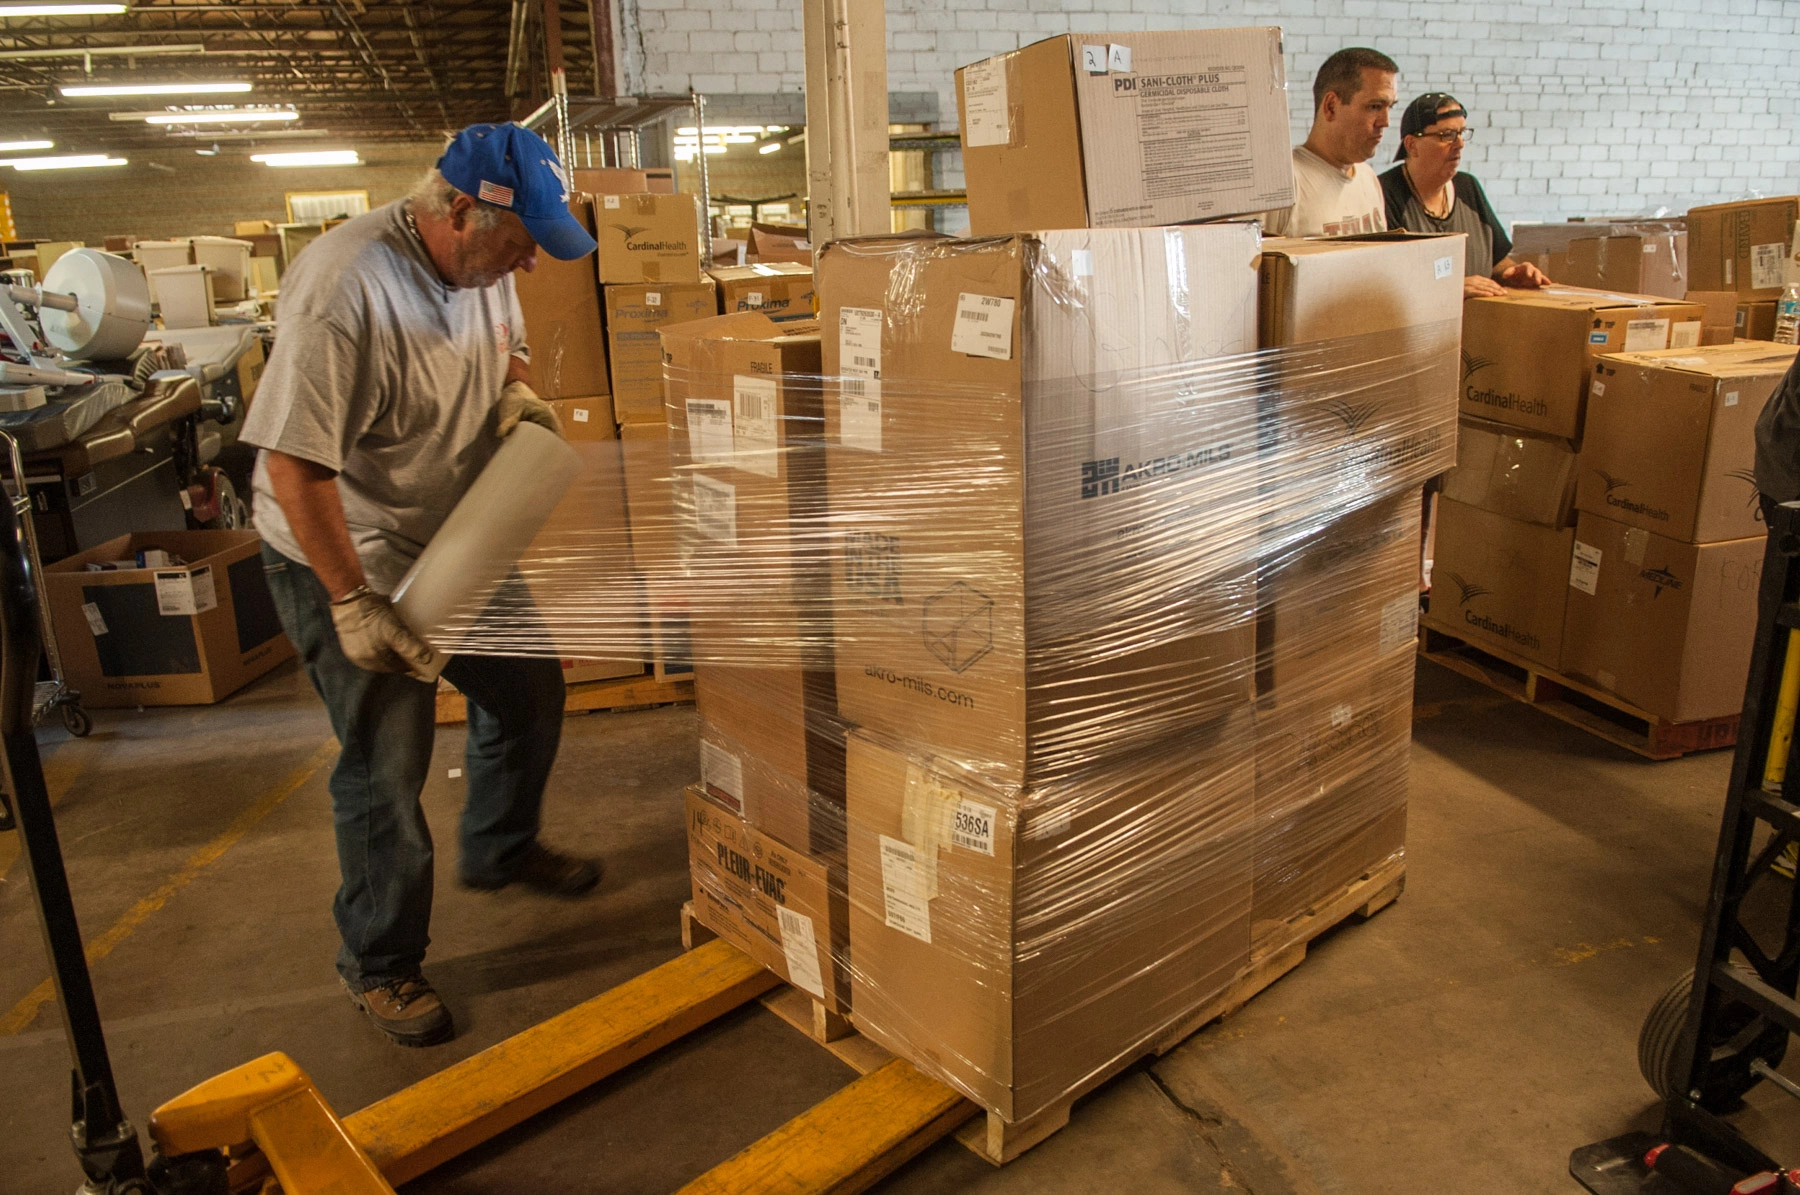 Boxes of needed supplies and equipment are palletized before shipment to Hungary.